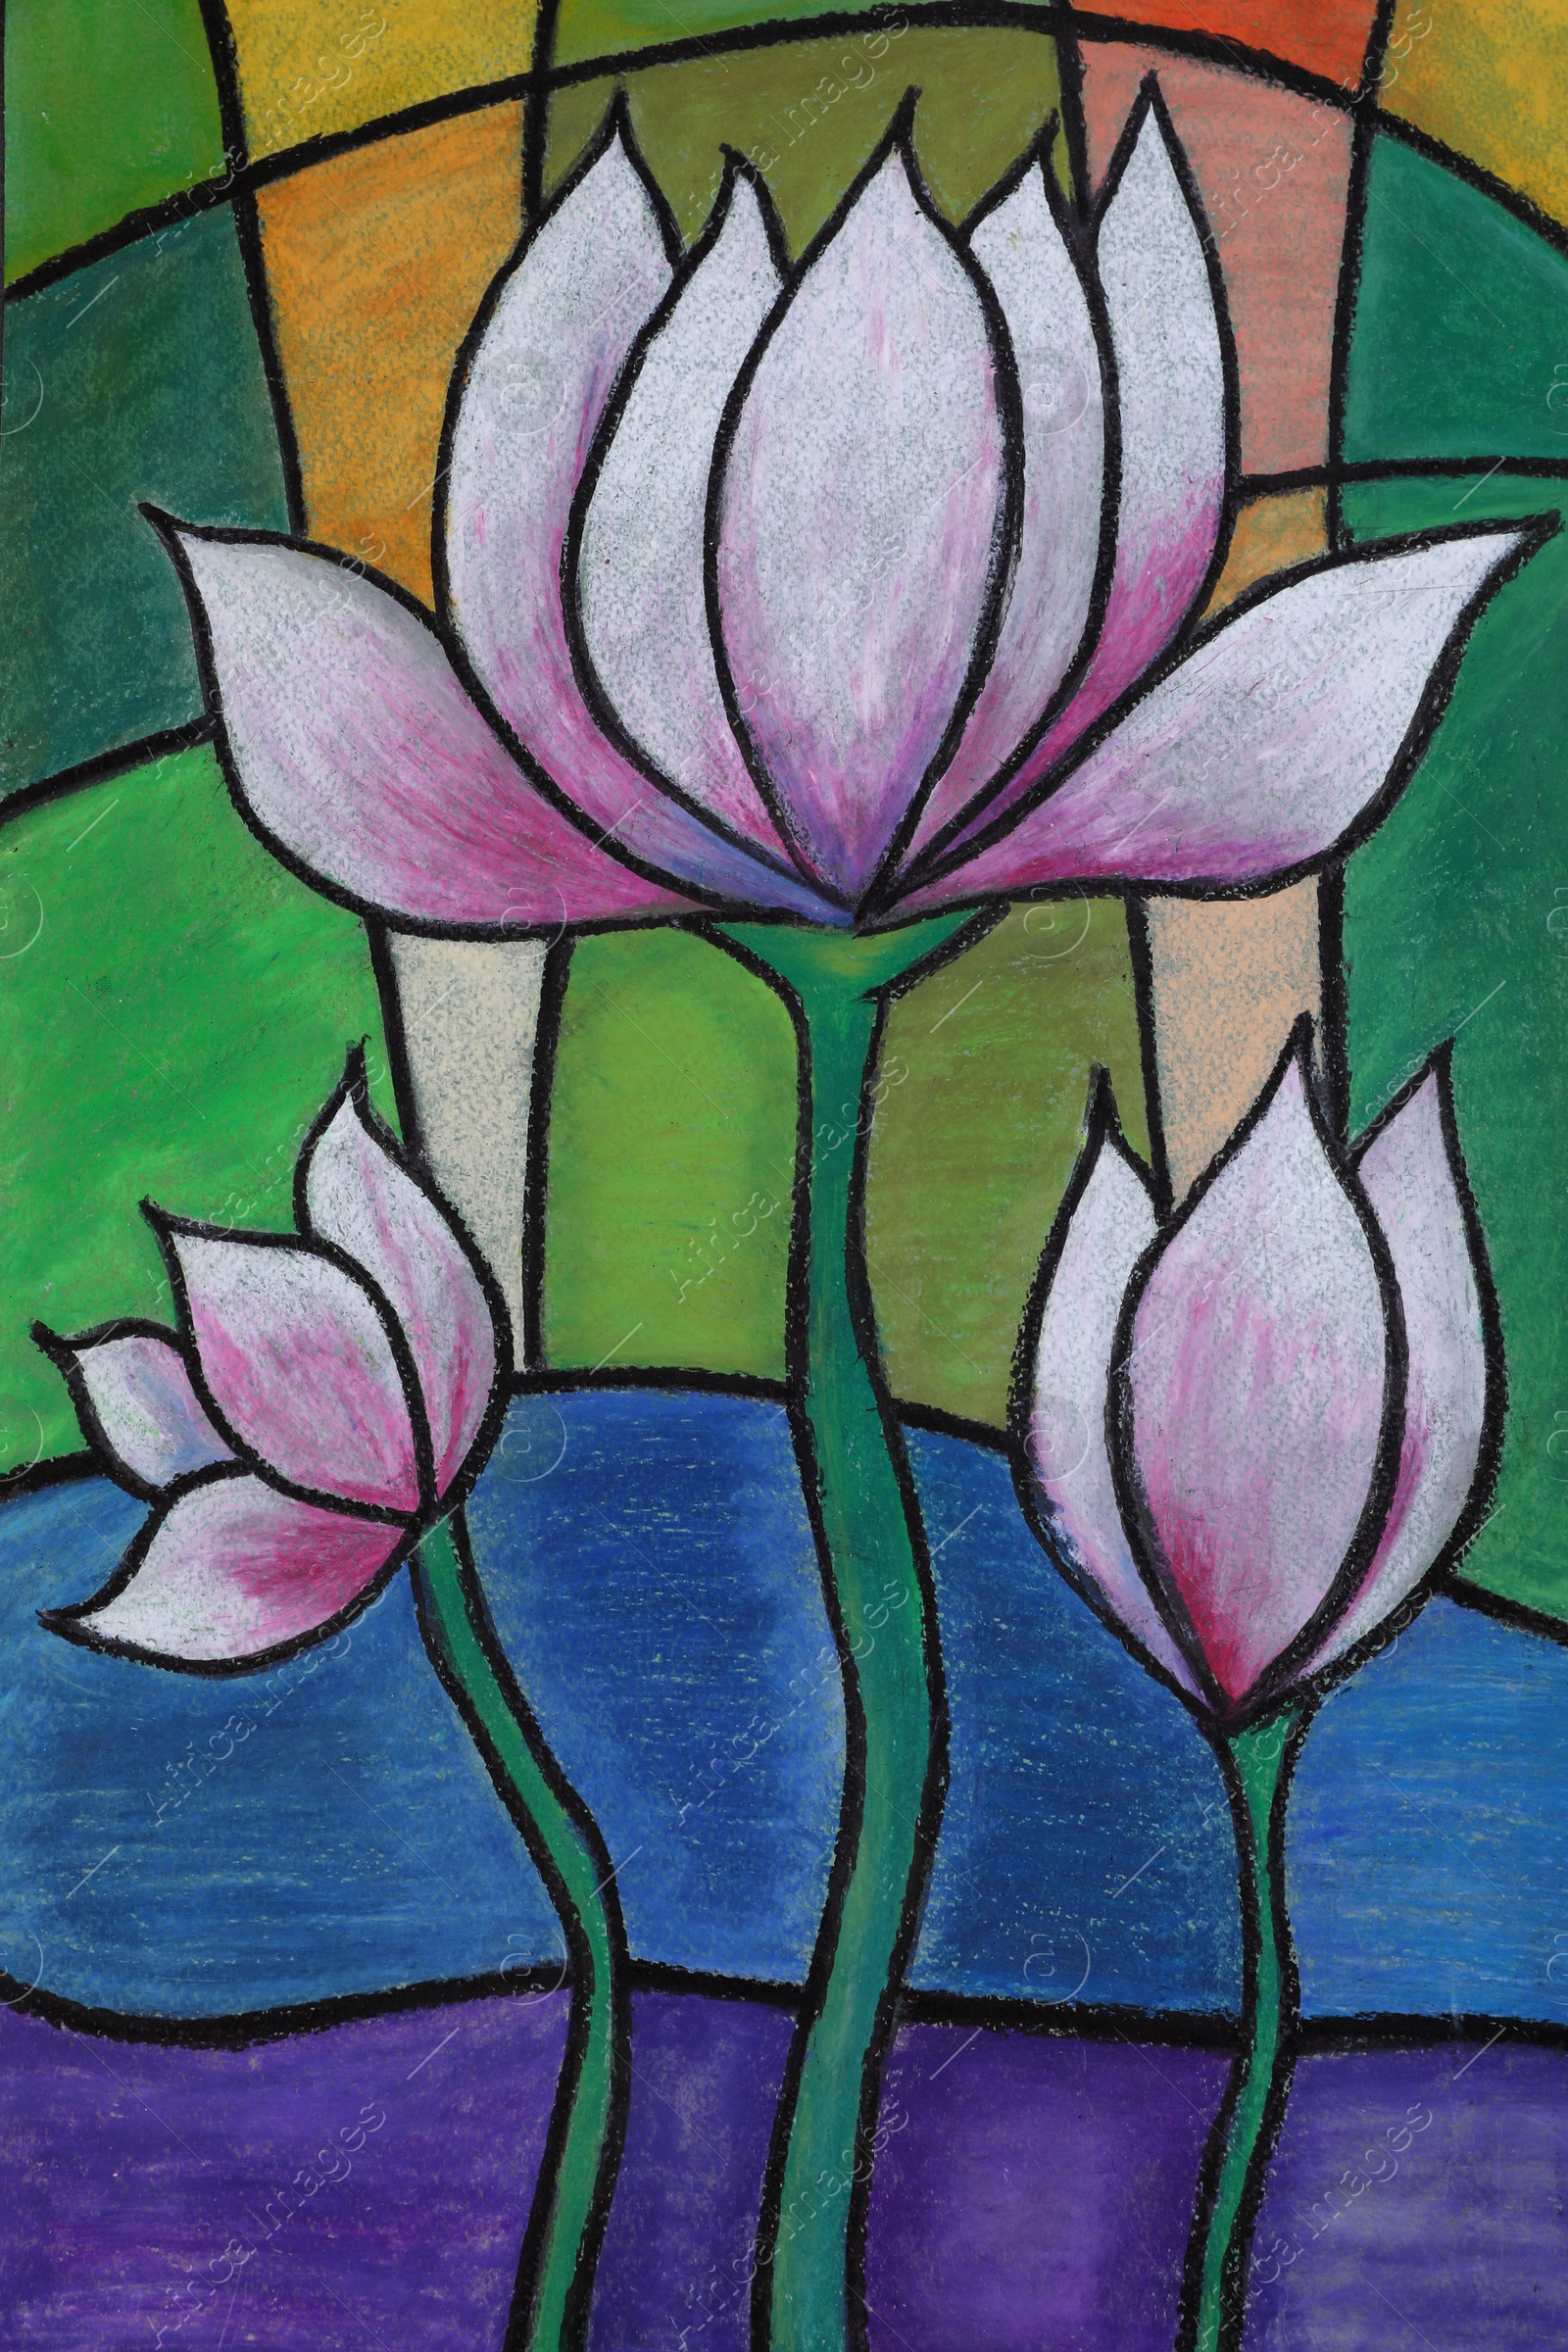 Photo of Pastel drawing of beautiful lotus flowers on colorful background